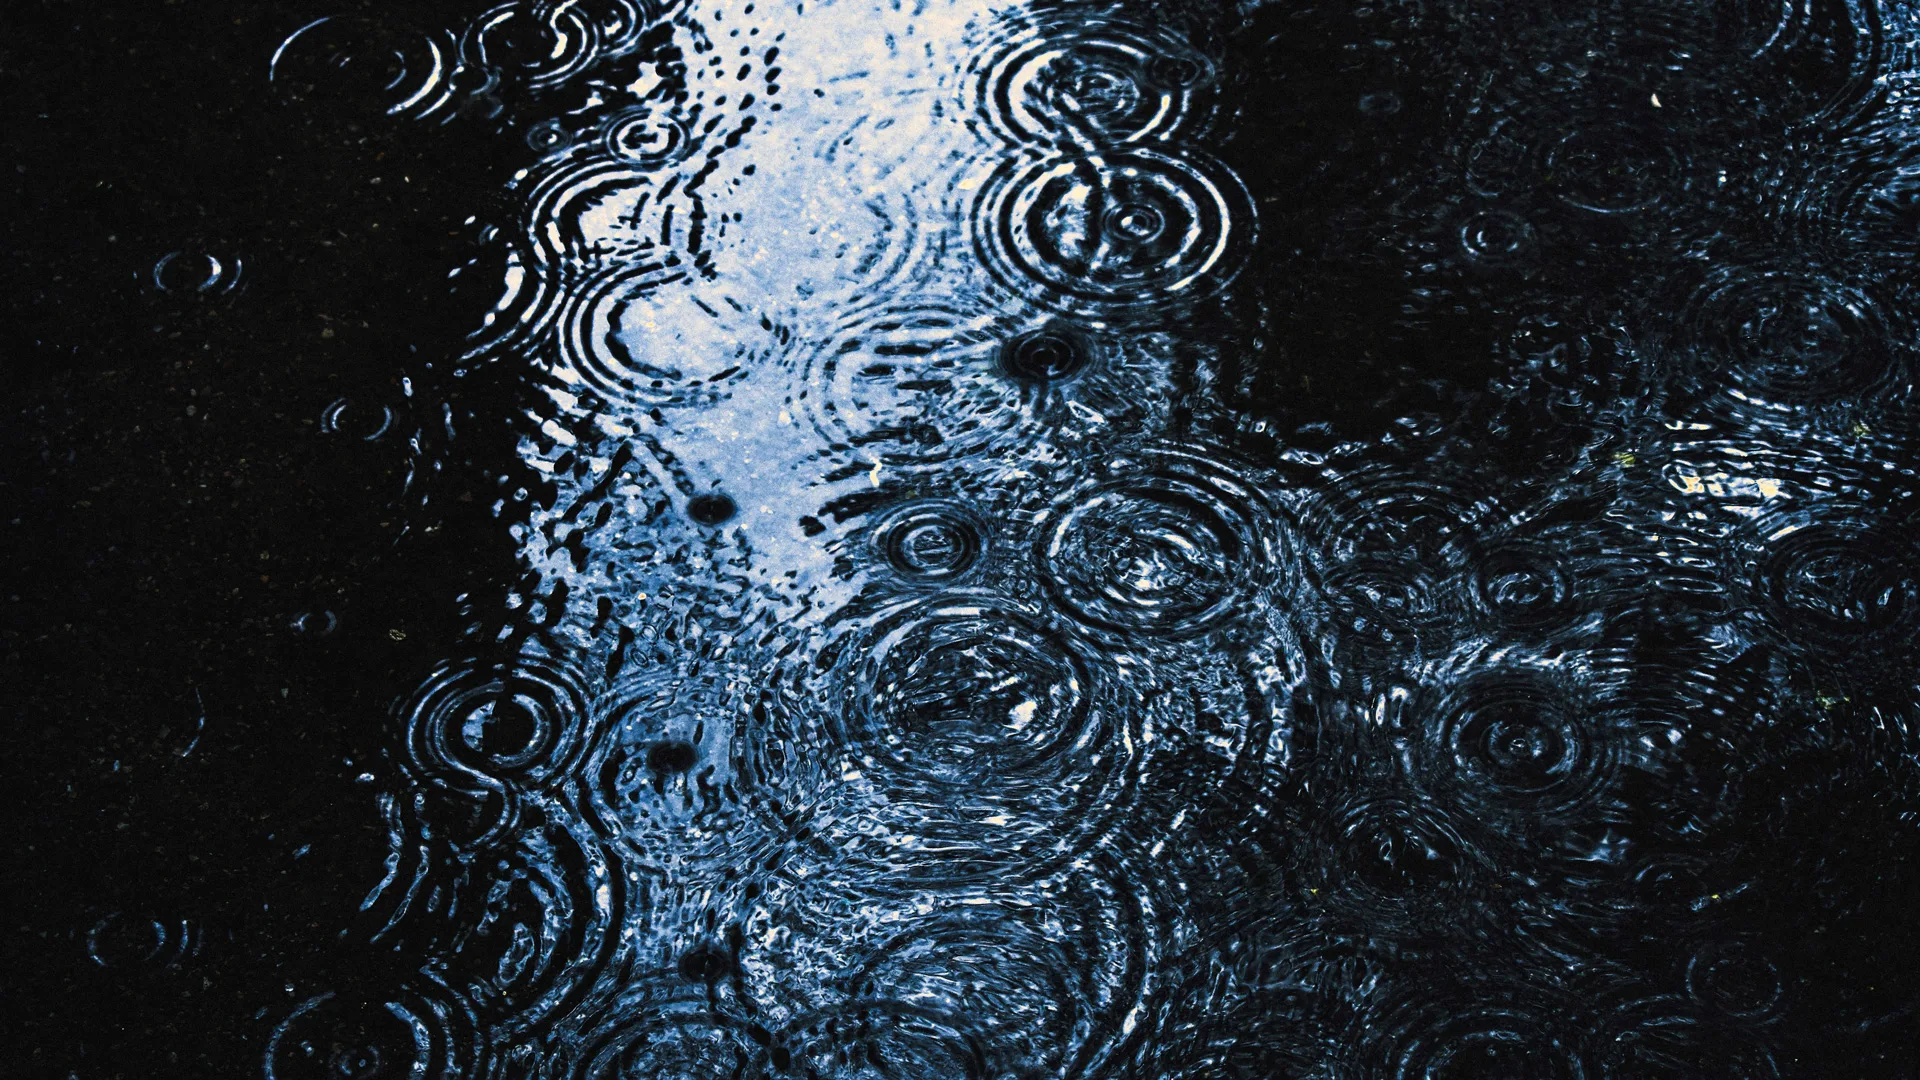 Photograph of raindrops falling on a puddle of water